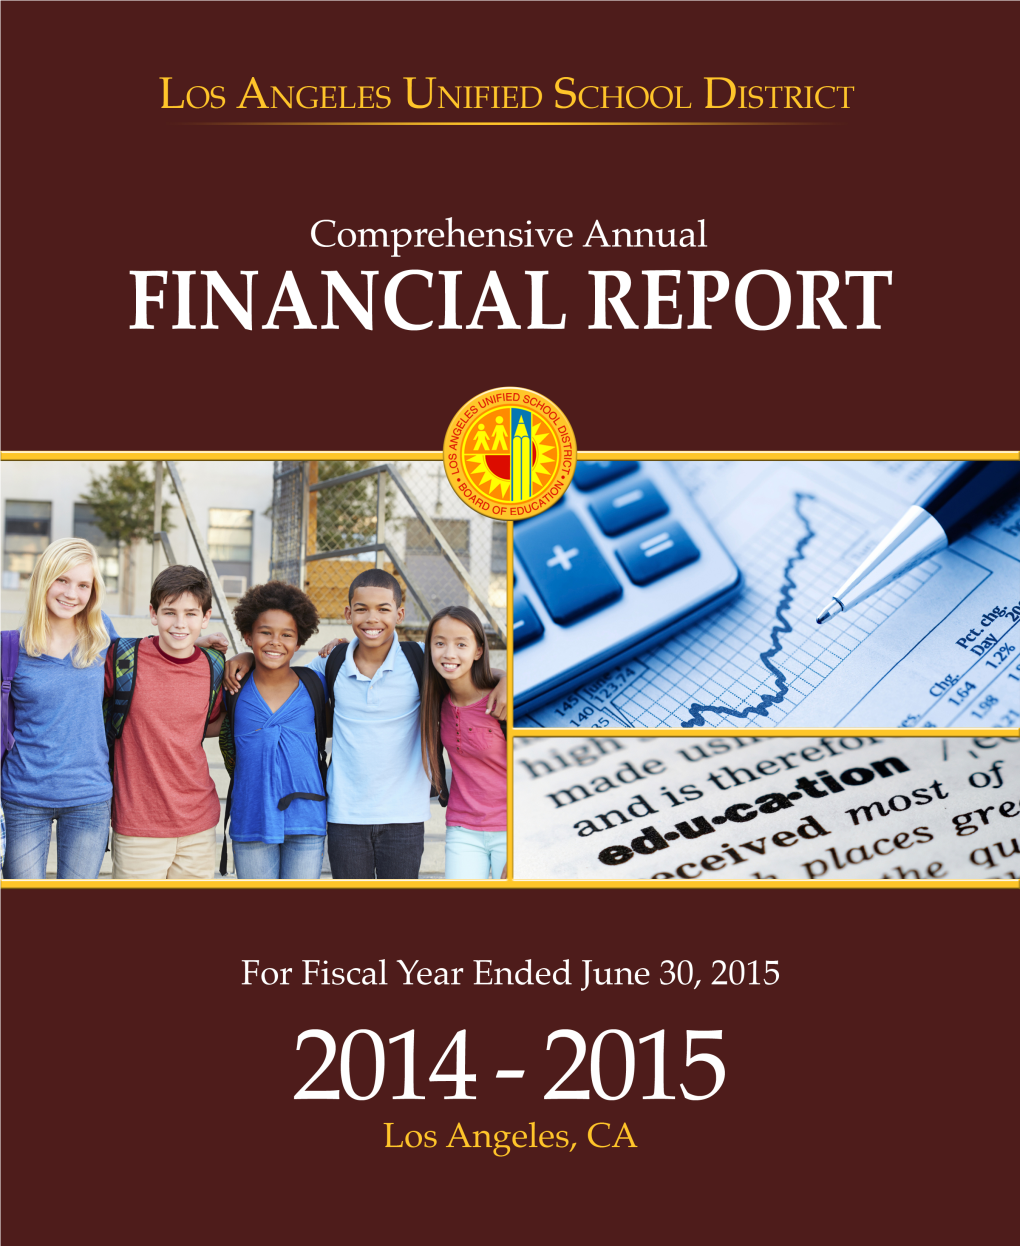 Comprehensive Annual Financial Report Fiscal Year Ended June 30, 2015